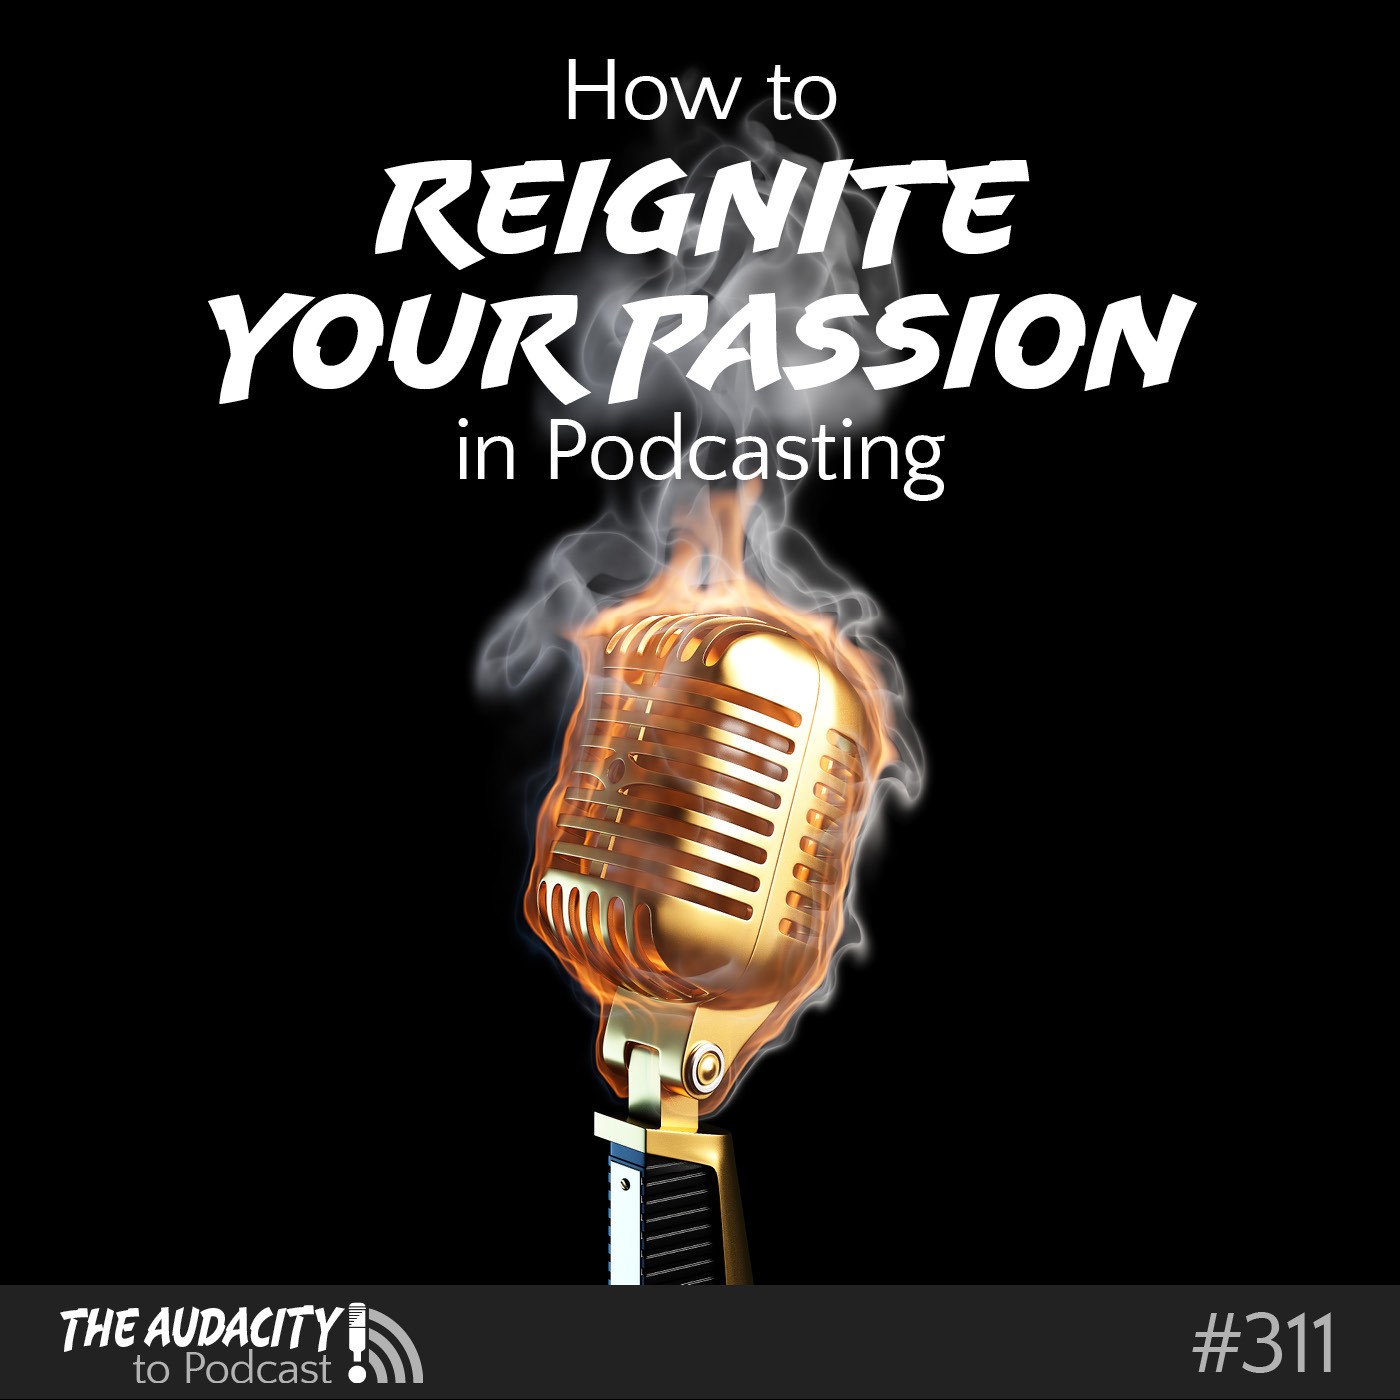 How to Reignite Your Passion in Podcasting